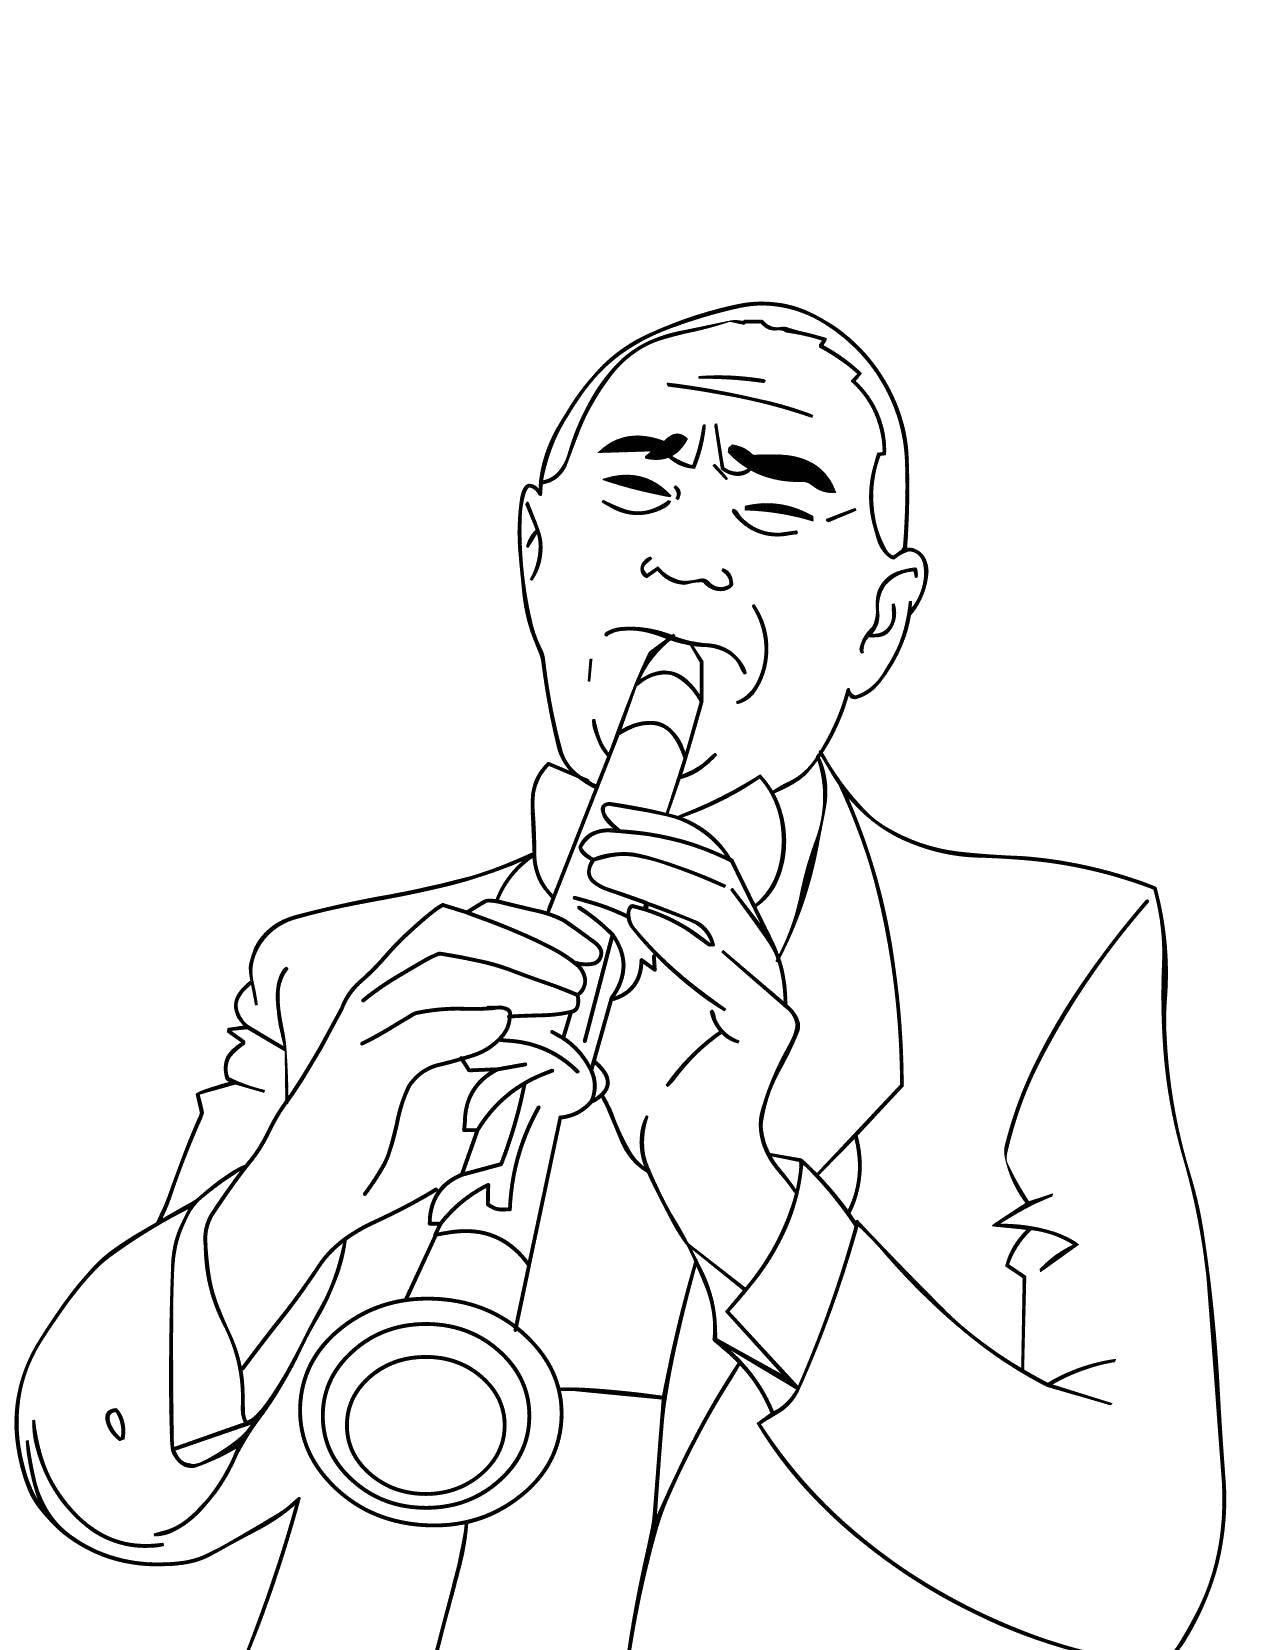 Coloring Clarinetist. Category Music. Tags:  Music, instrument, musician, note.